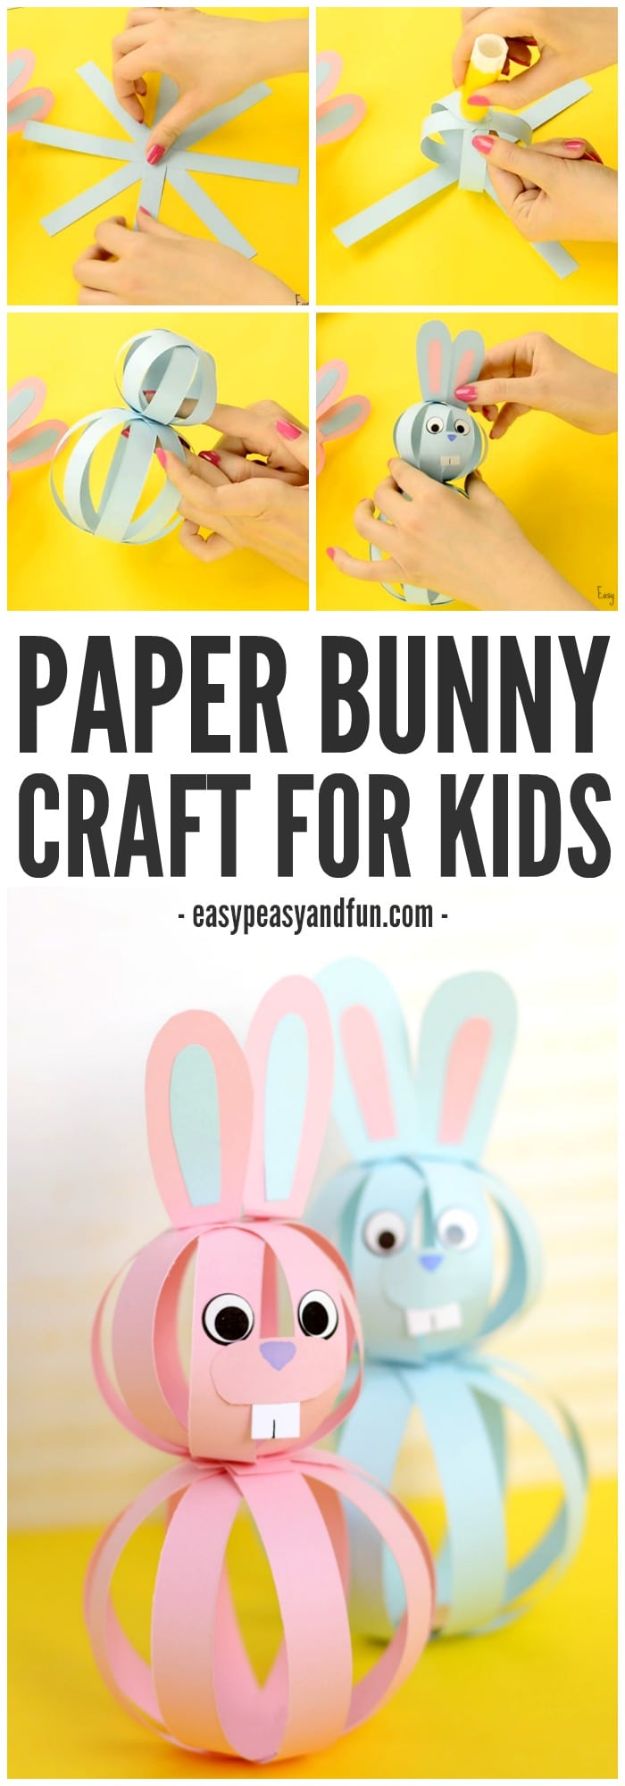 Crafts for Boys - Easy Paper Bunny Craft - Cute Crafts for Young Boys, Toddlers and School Children - Fun Paints to Make, Arts and Craft Ideas, Wall Art Projects, Colorful Alphabet and Glue Crafts, String Art, Painting Lessons, Cheap Project Tutorials and Inexpensive Things for Kids to Make at Home - Cute Room Decor and DIY Gifts to Make for Mom and Dad #diyideas #kidscrafts #craftsforboys